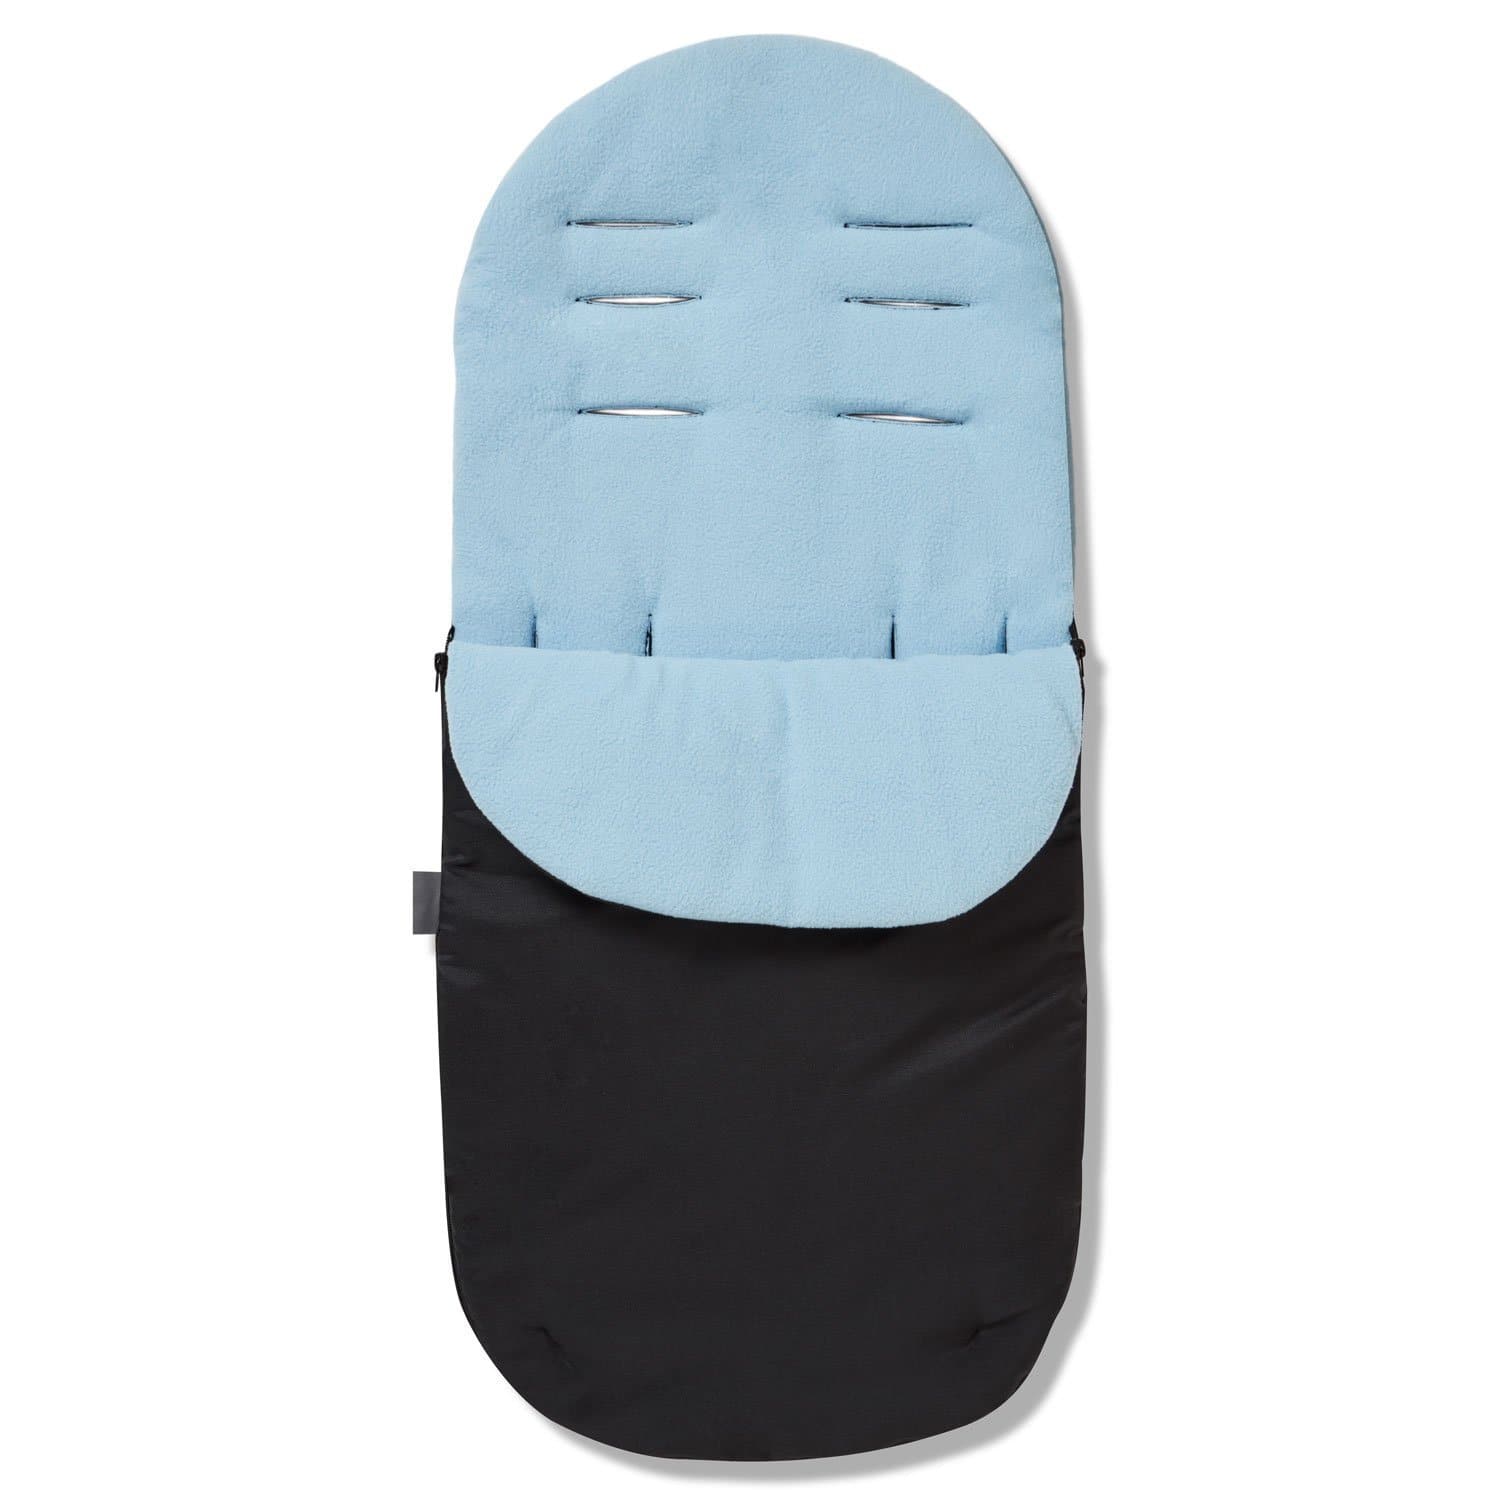 Footmuff / Cosy Toes Compatible with Petite - Light Blue / Fits All Models | For Your Little One